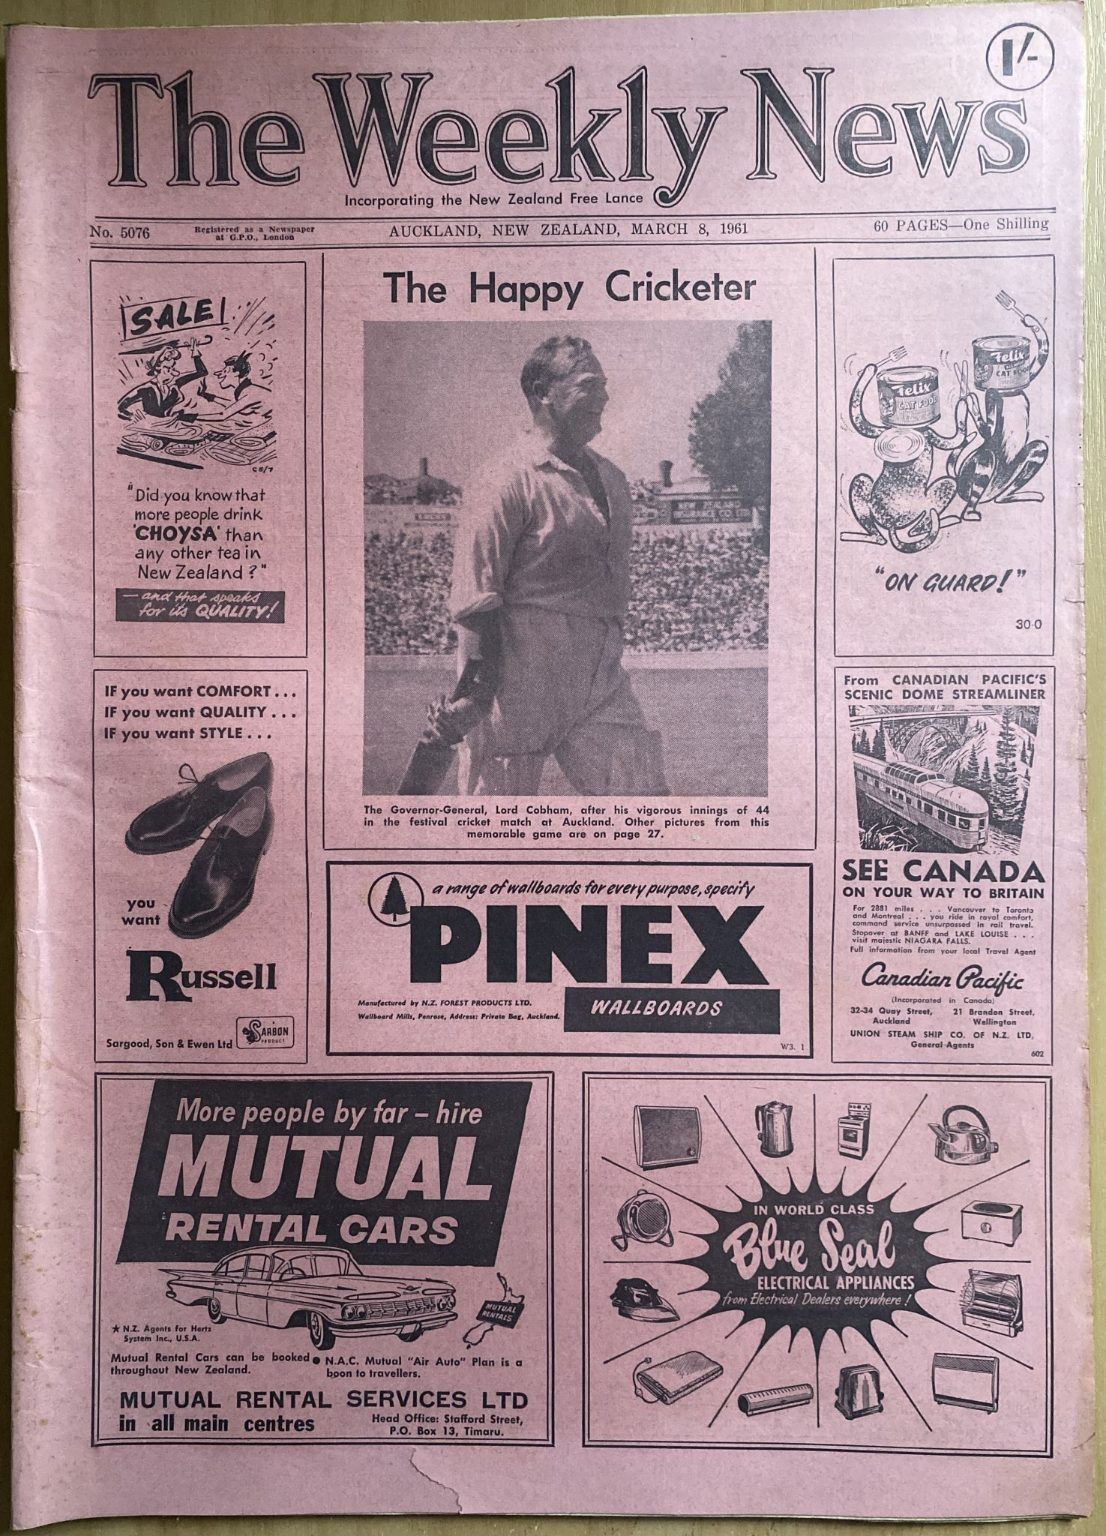 OLD NEWSPAPER: The Weekly News, No. 5076, 8 March 1961